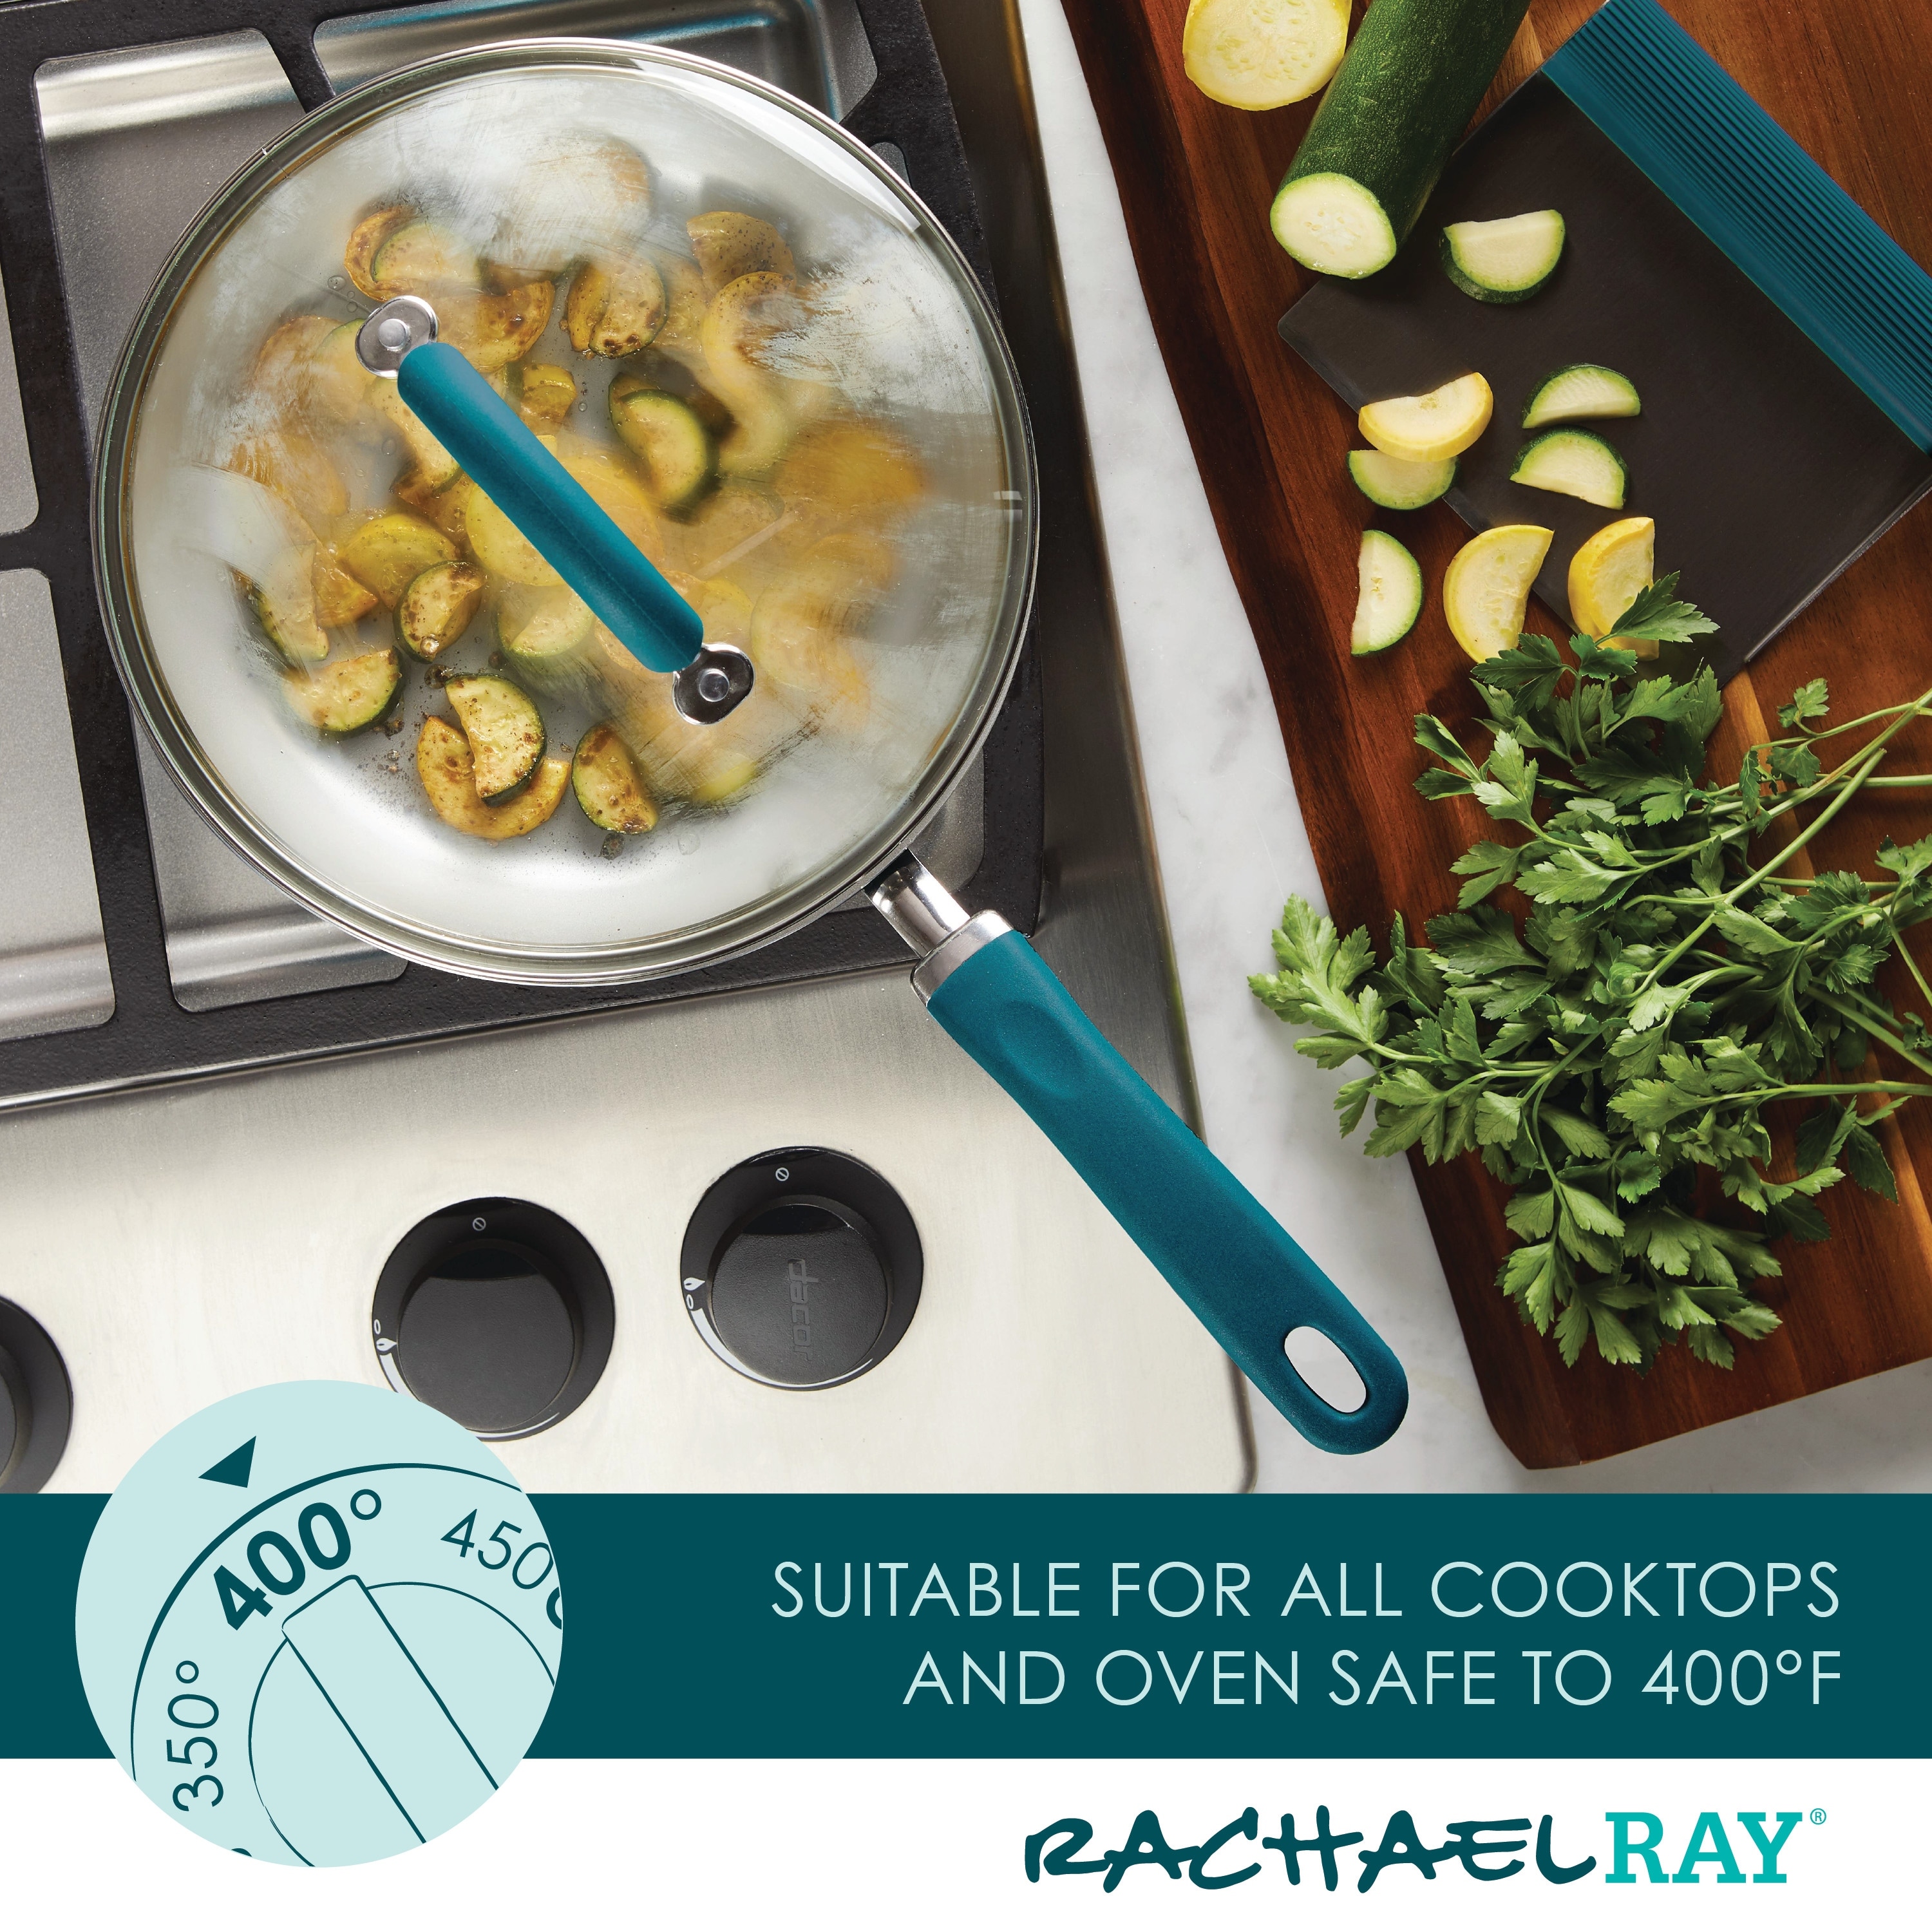 https://ak1.ostkcdn.com/images/products/is/images/direct/22e56b12d4758800aef29b5e88c6982d45aeac6d/Rachael-Ray-Create-Delicious-Aluminum-Nonstick-Induction-Deep-Frying-Pan-with-Lid%2C-9.5-Inch%2C-Red-Shimmer.jpg